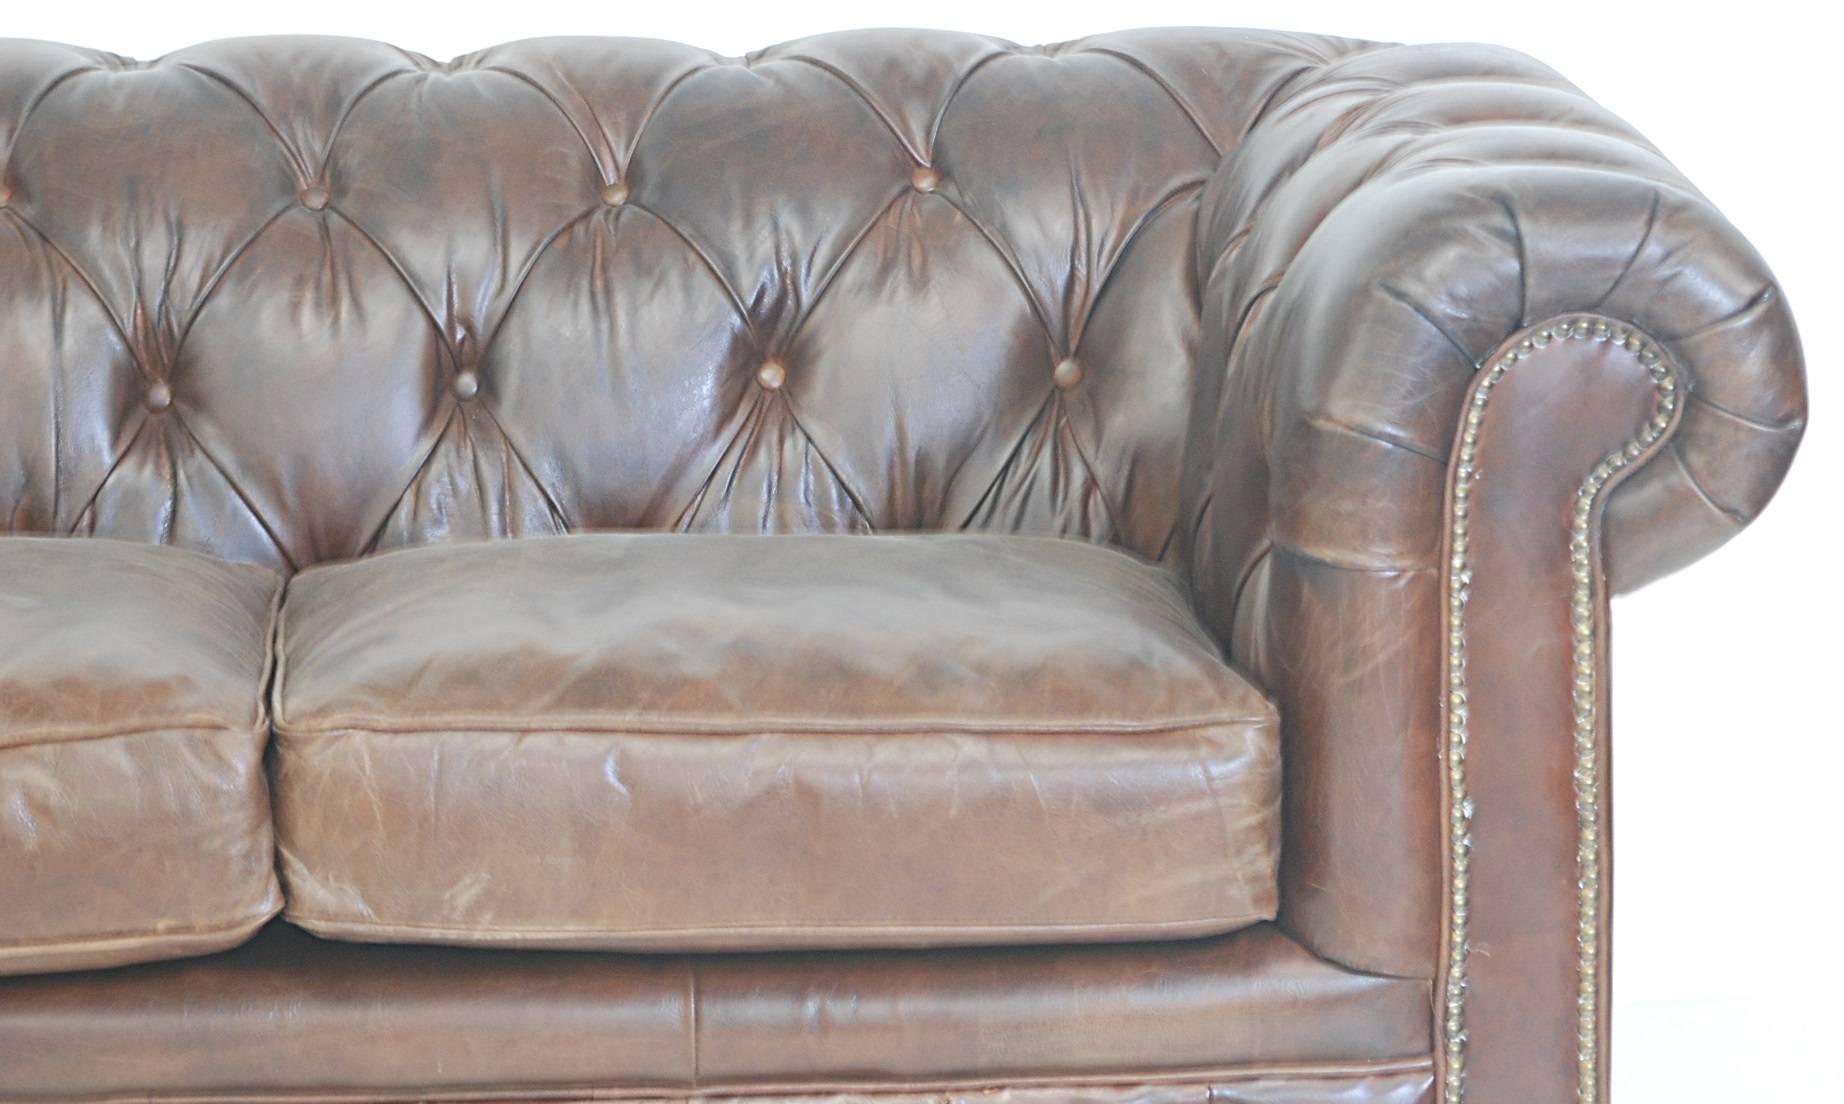 Brown tufted leather with buttons and two loose cushions. Mahogany legs on brass cup casters.